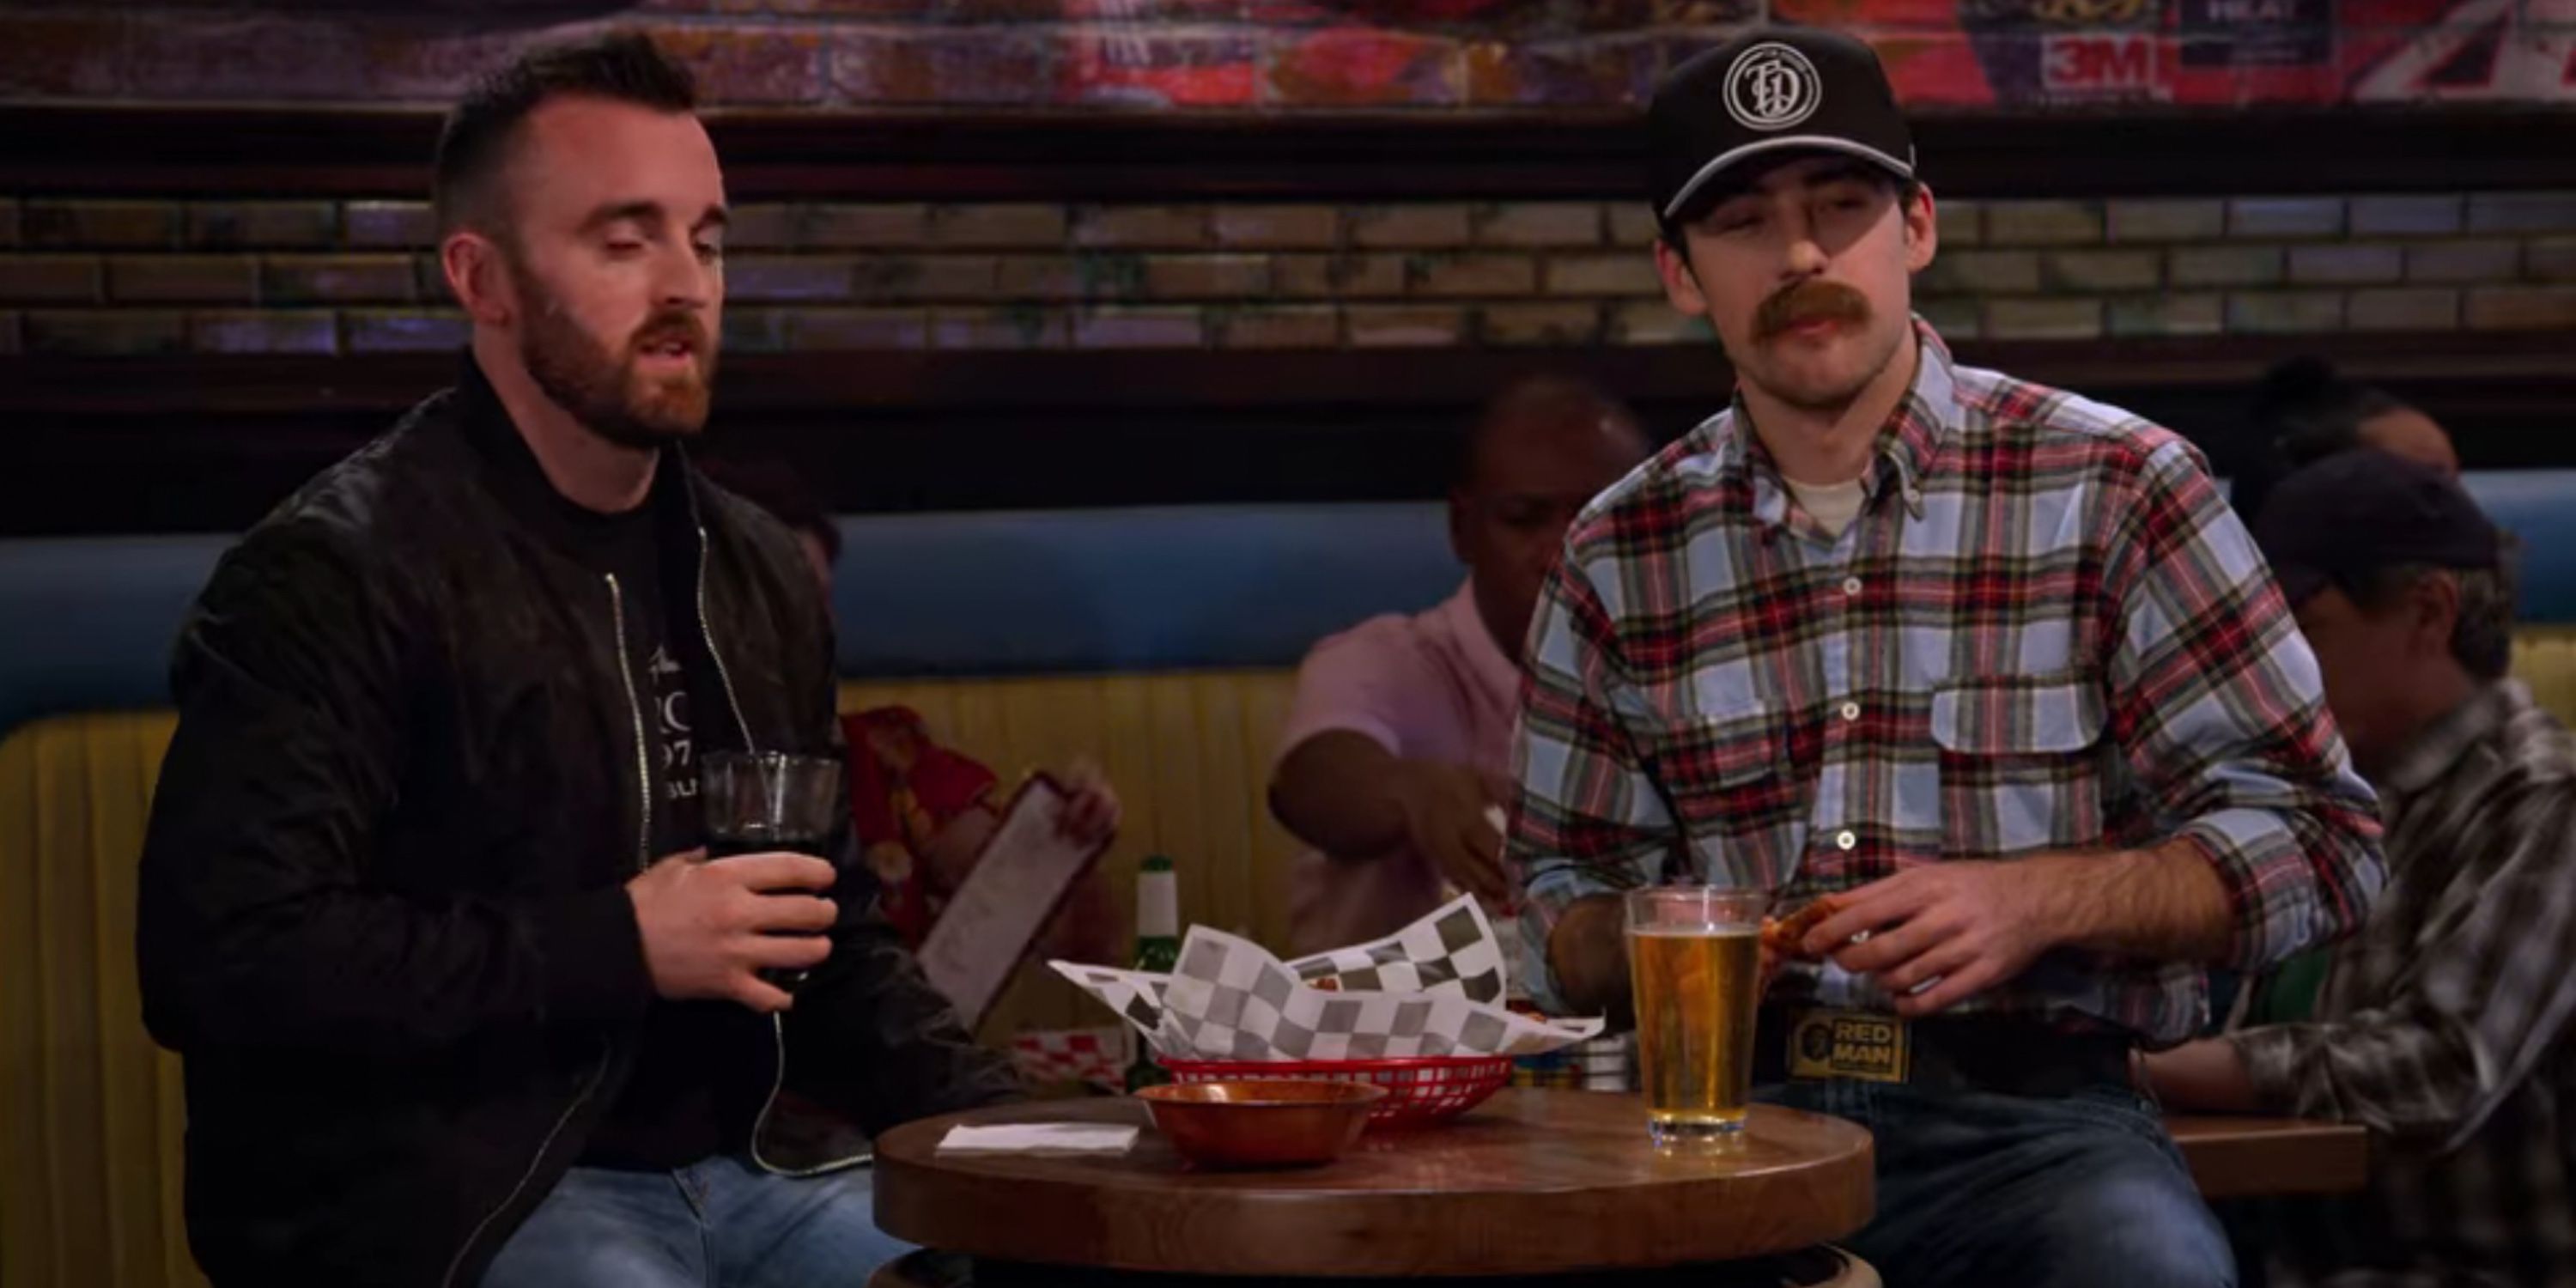 Austin Dillon and Ryan Blaney in The Crew on Netflix